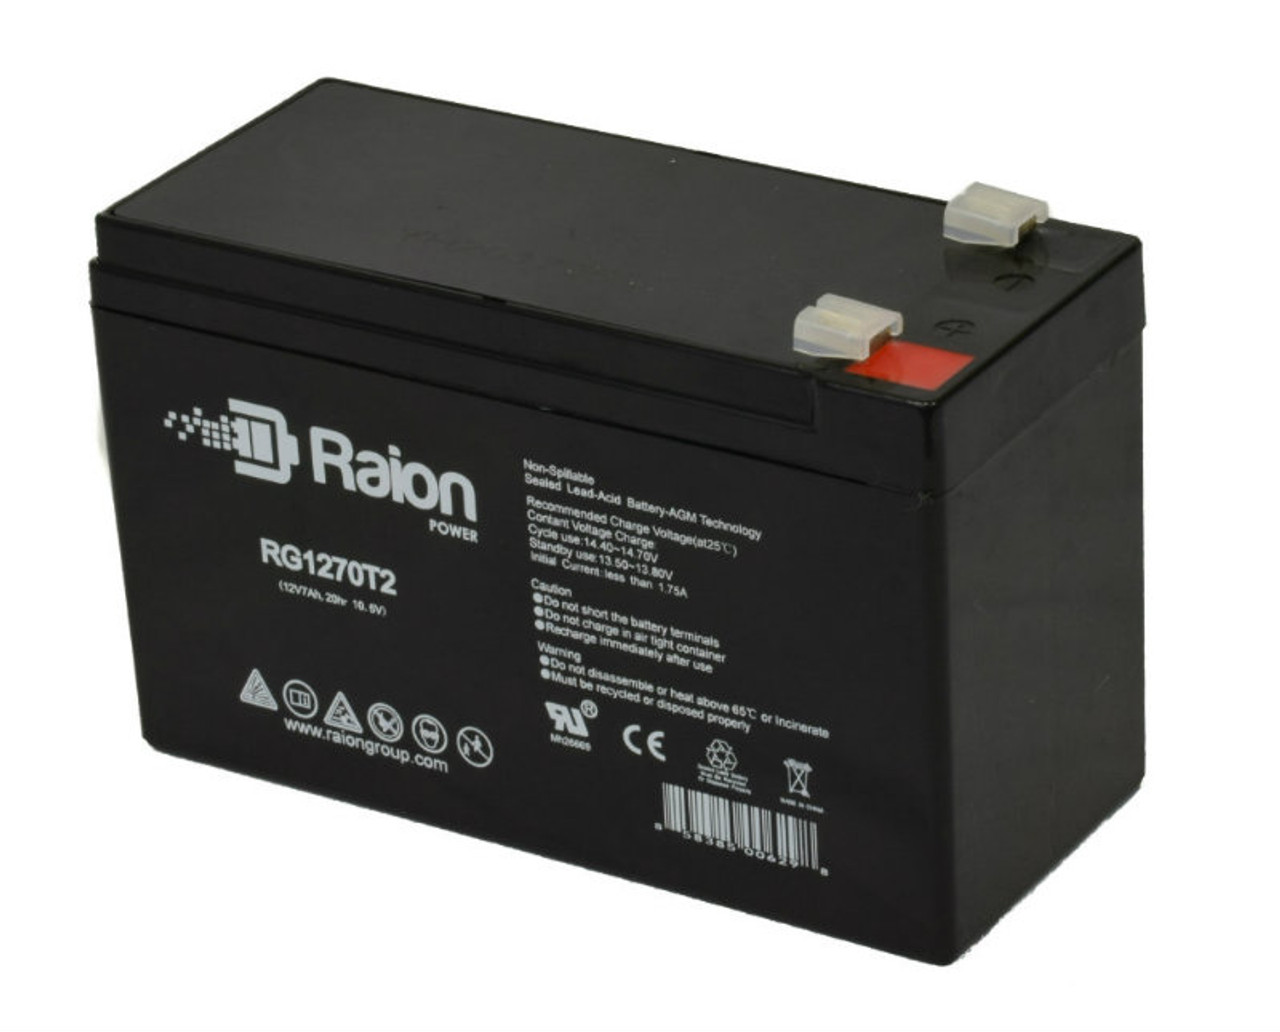 Raion Power RG1270T1 12V 7Ah Non-Spillable Replacement Battery for ExpertPower EXP1280